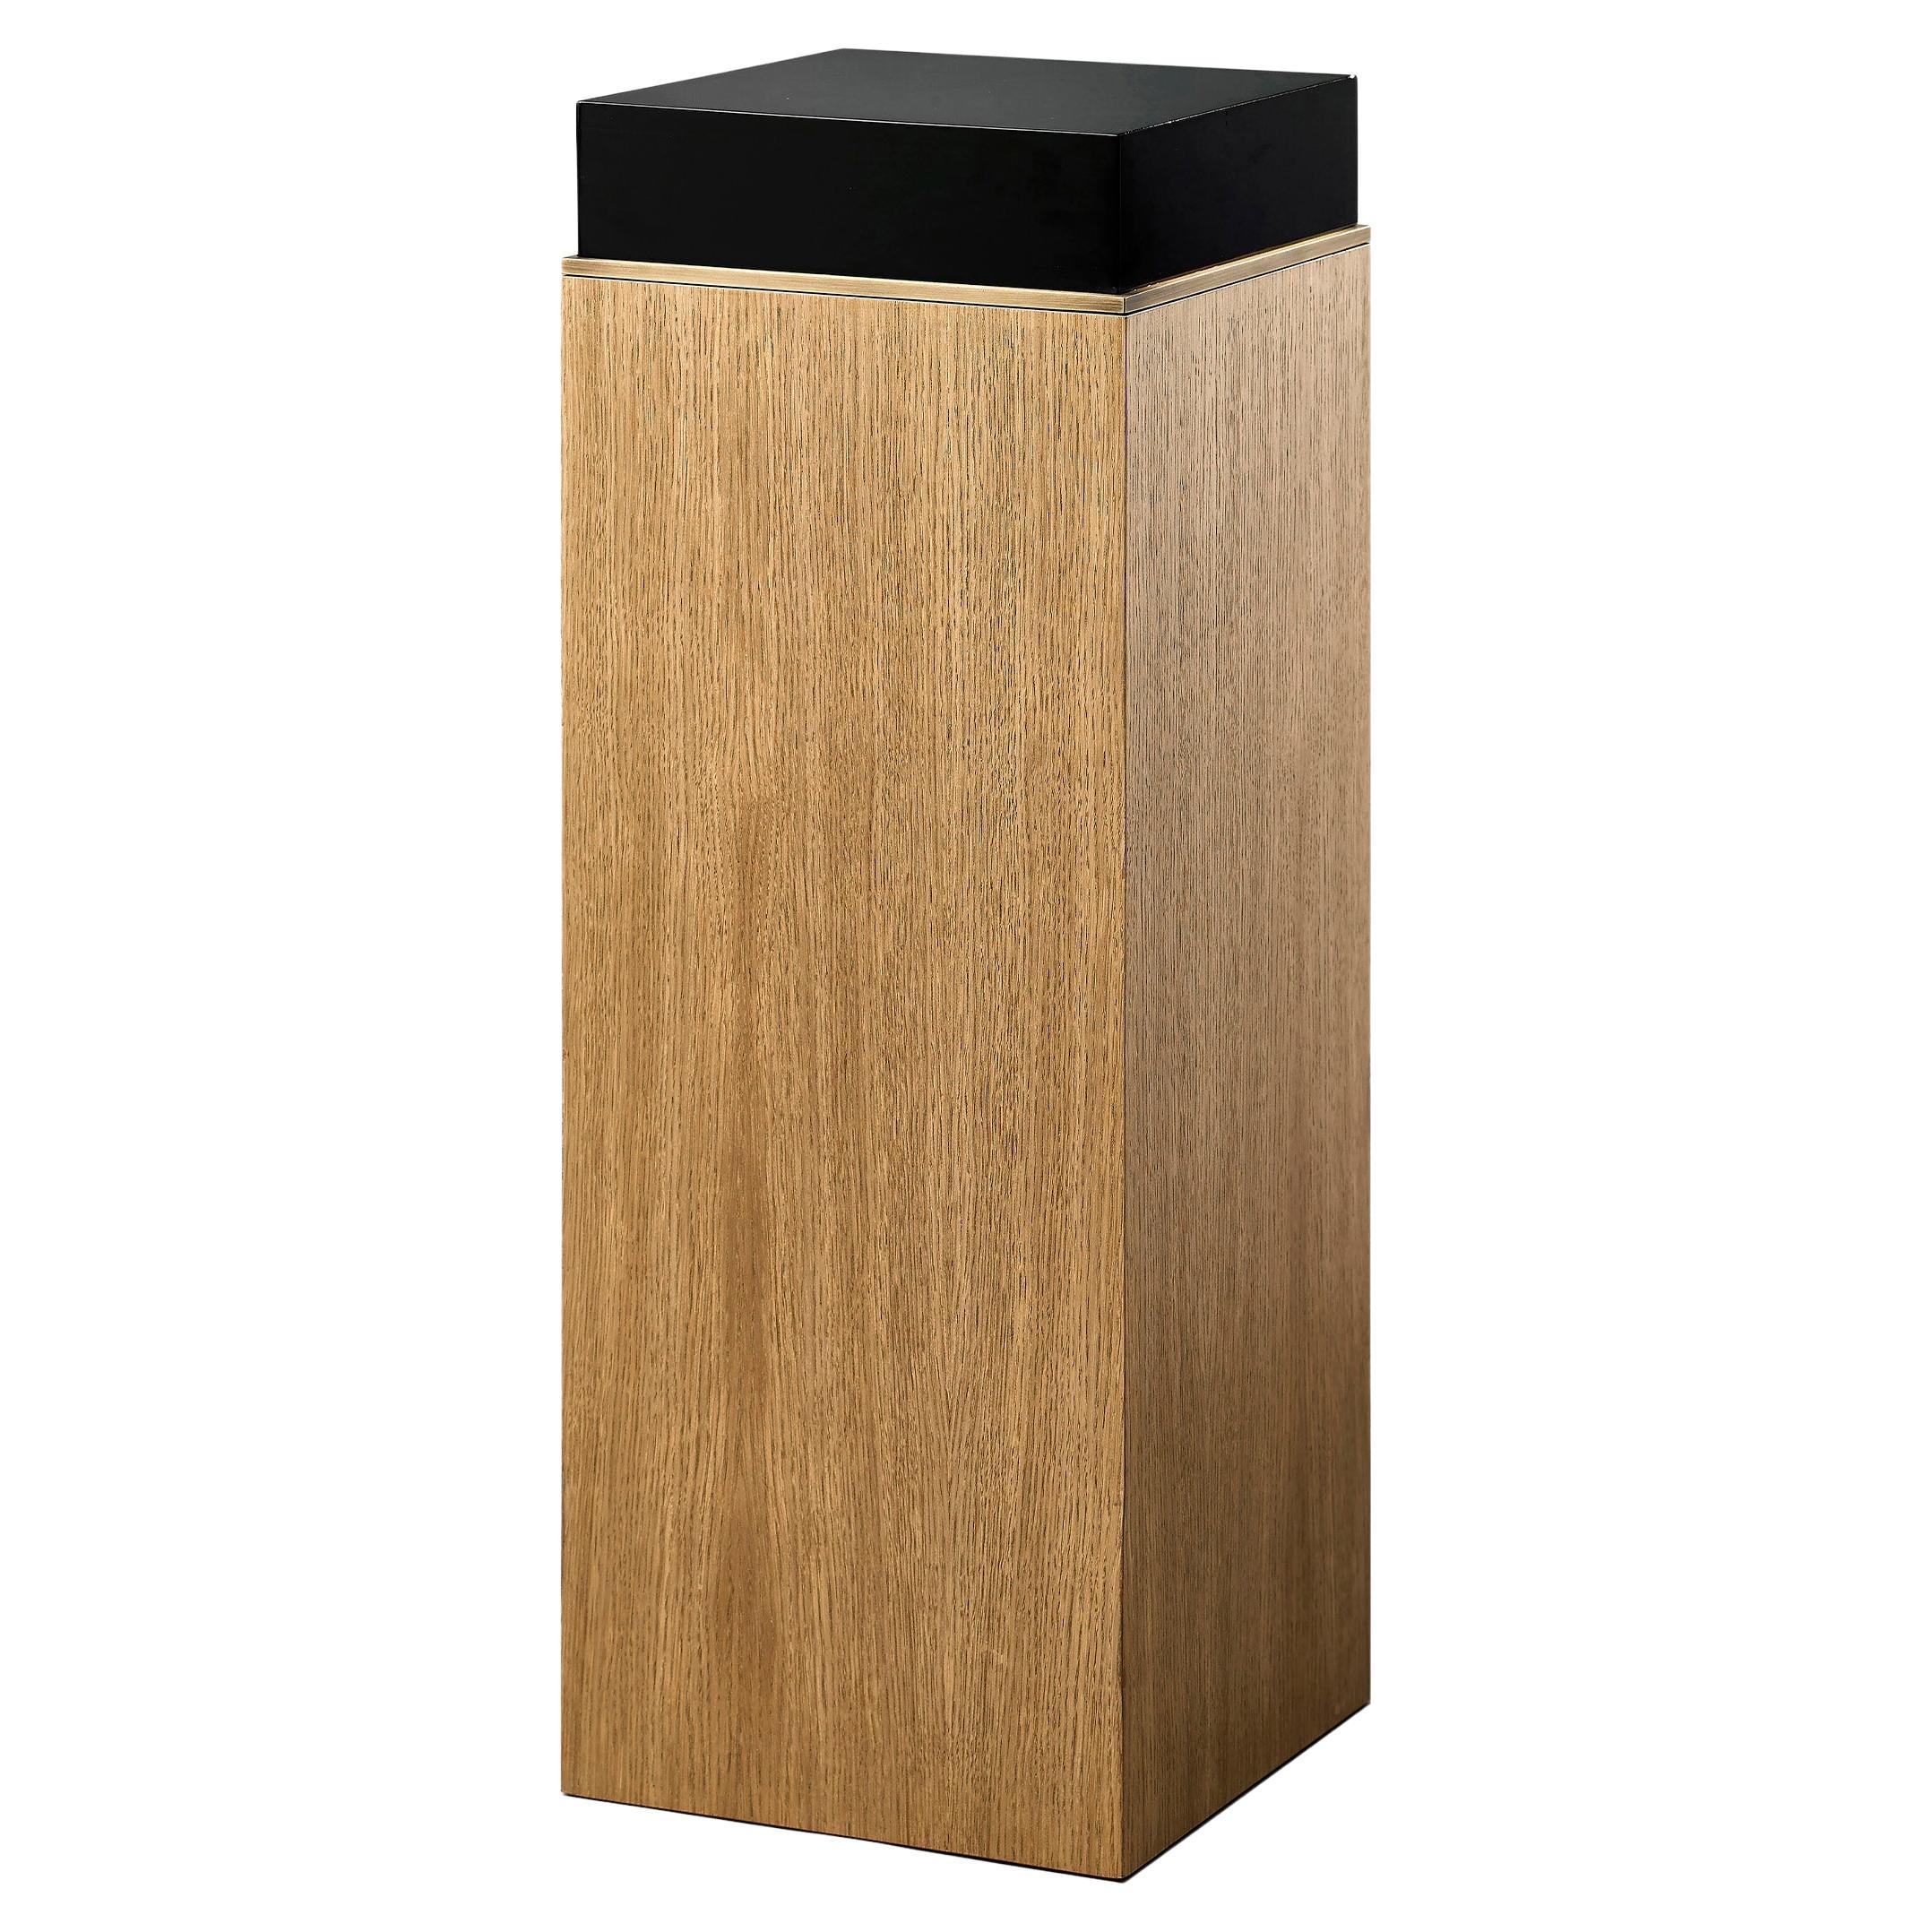 Block Pedestal, Limed Oak and Brass Details, Handcrafted in Portugal by Duistt